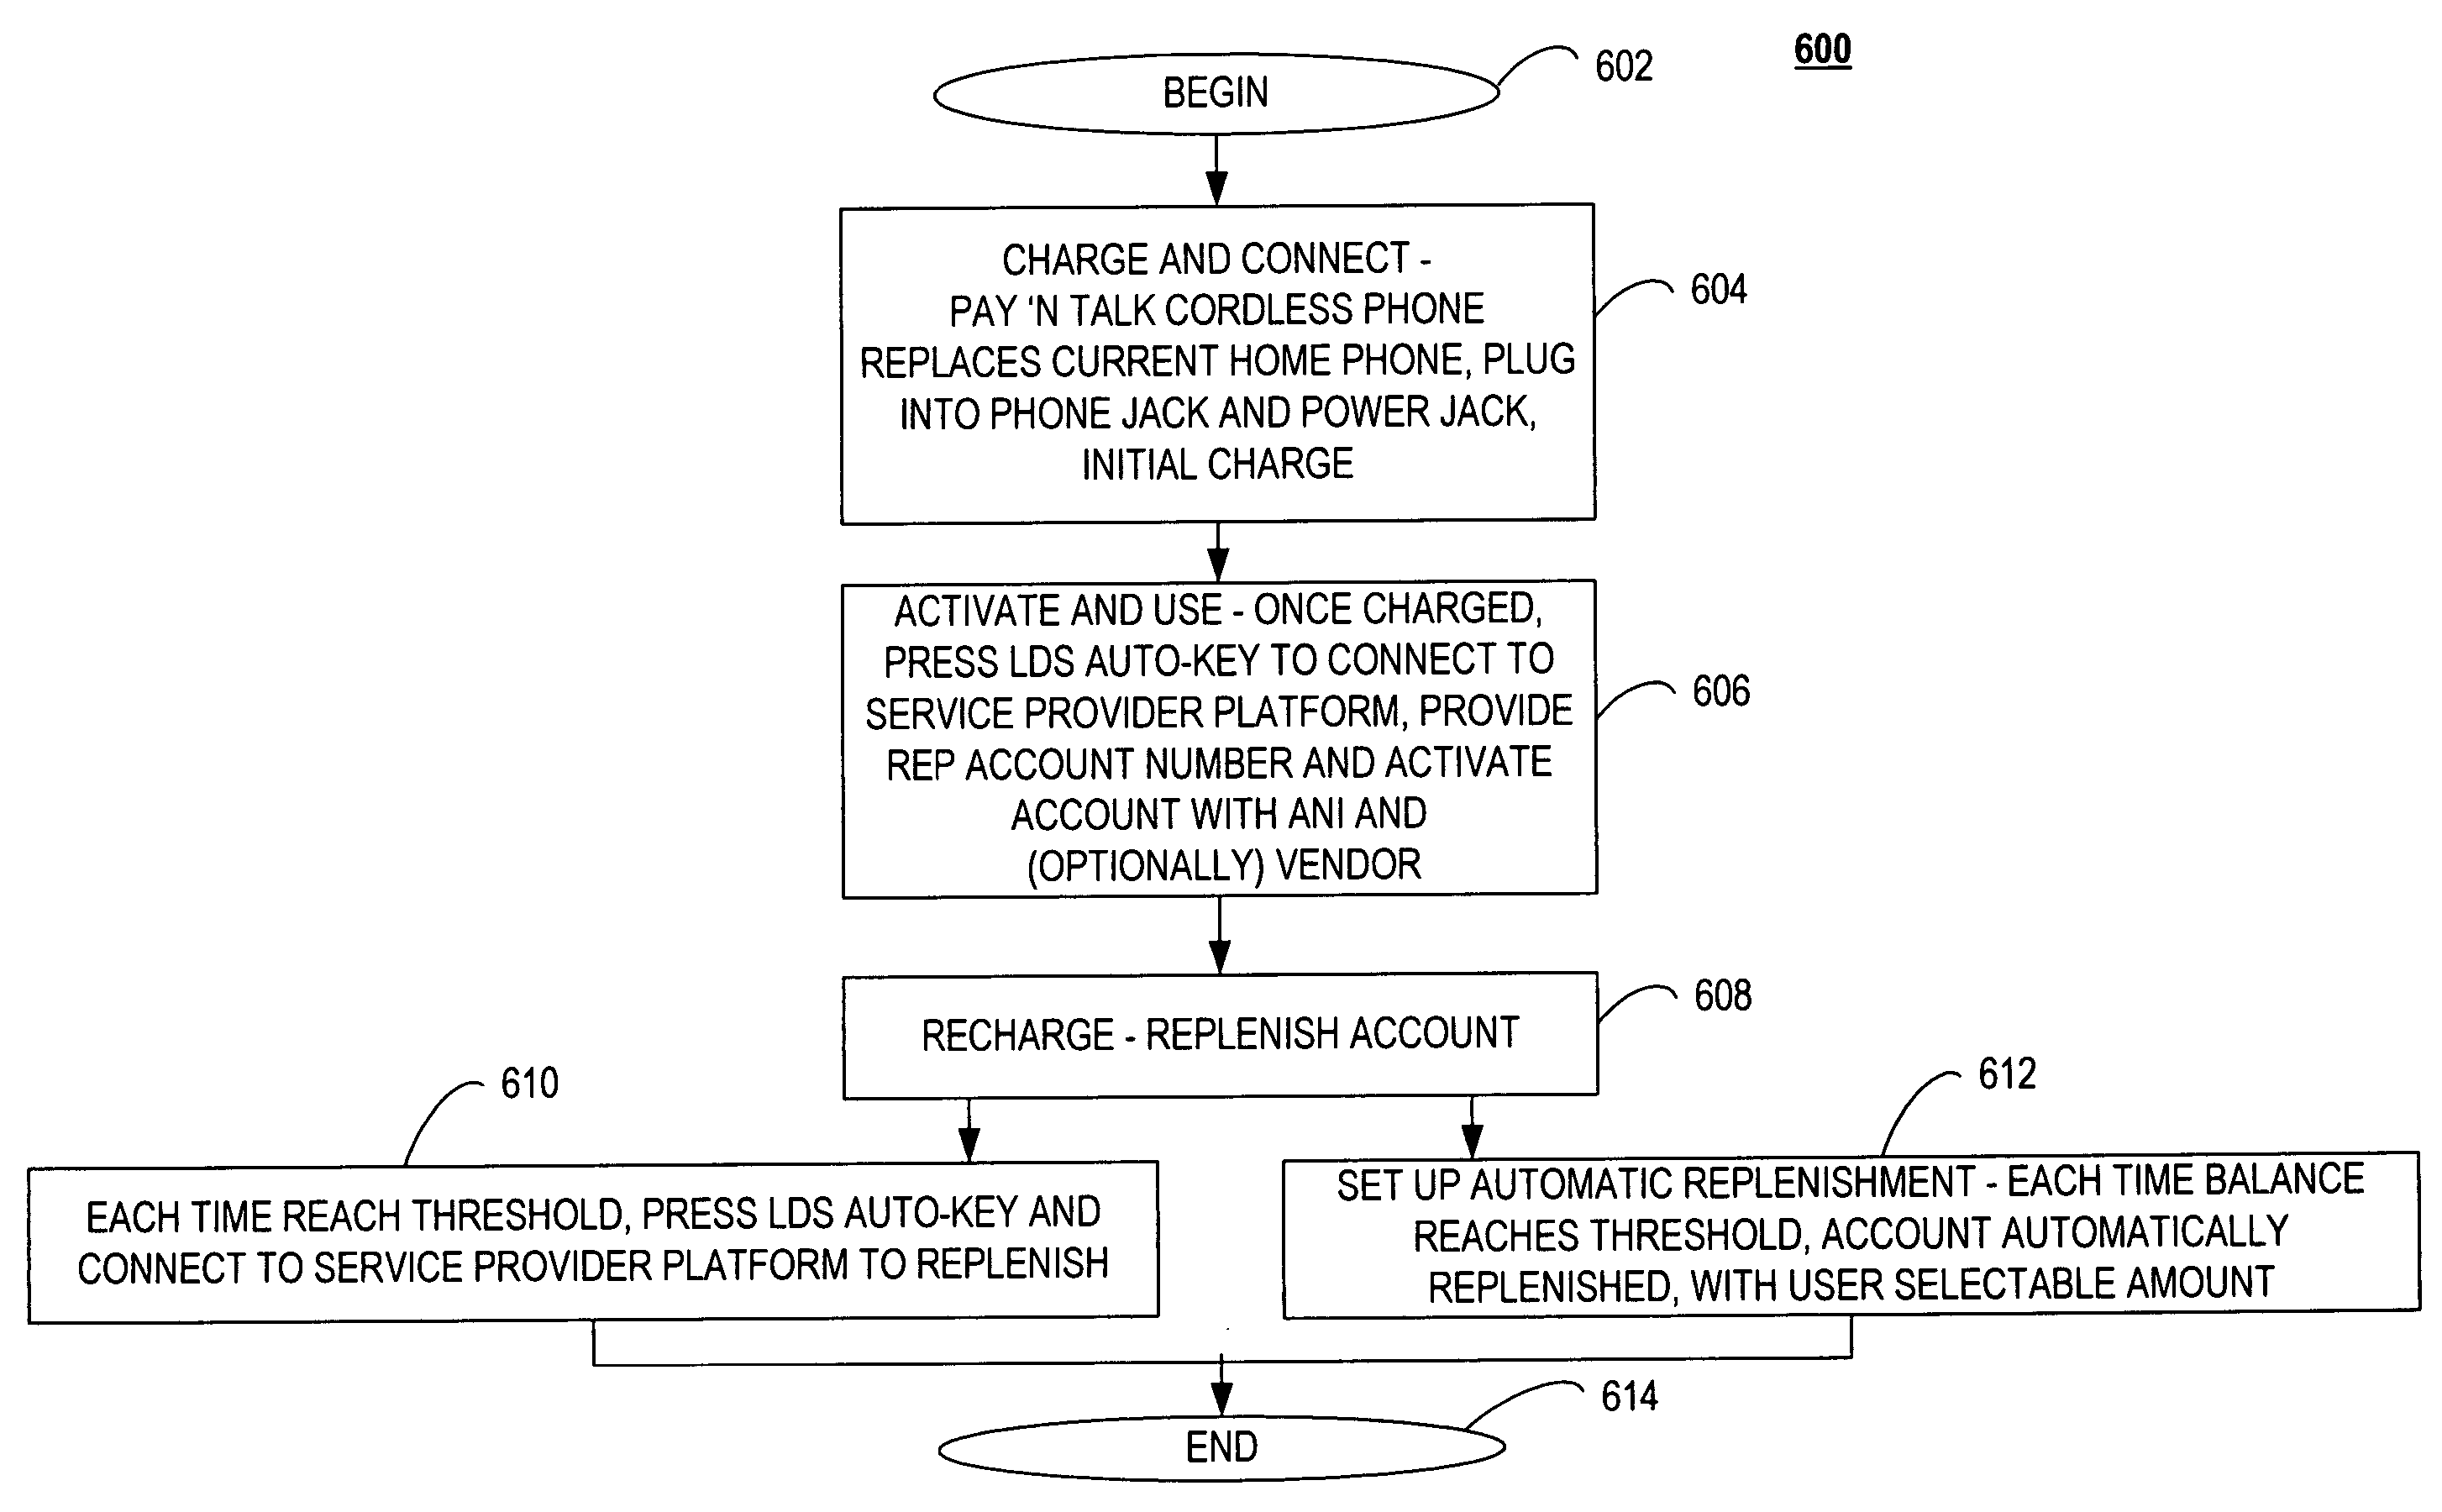 Apparatus, system, method and computer program product for pre-paid long distance telecommunications